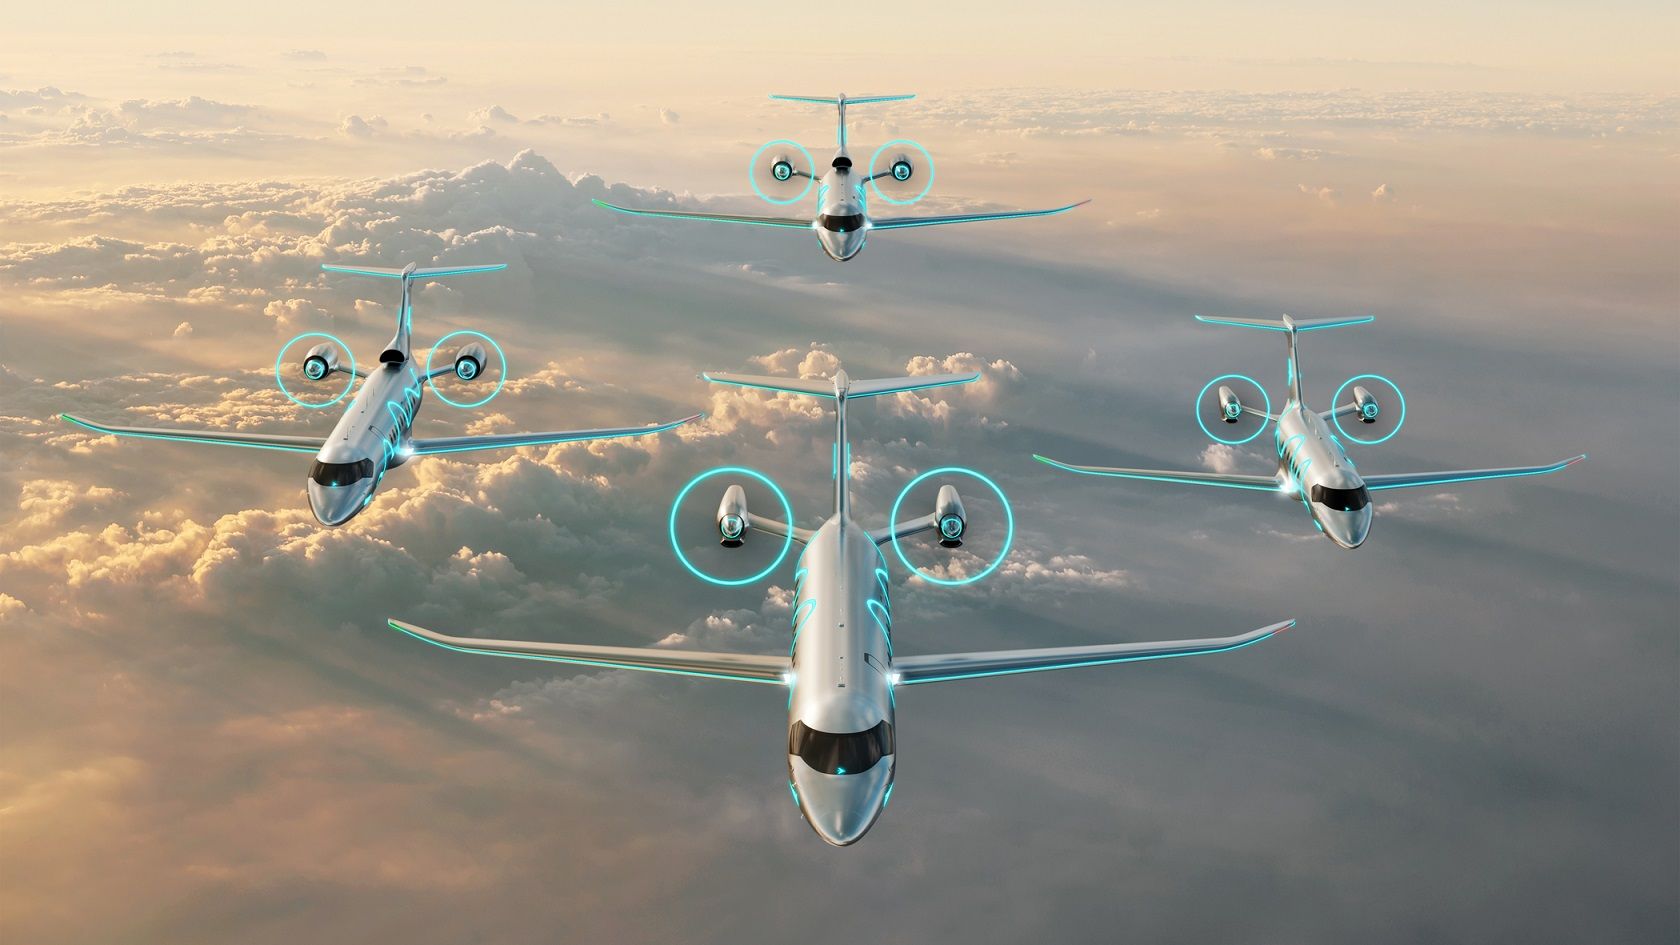 A render of Embraer's Energia Family aircraft flying in formation.